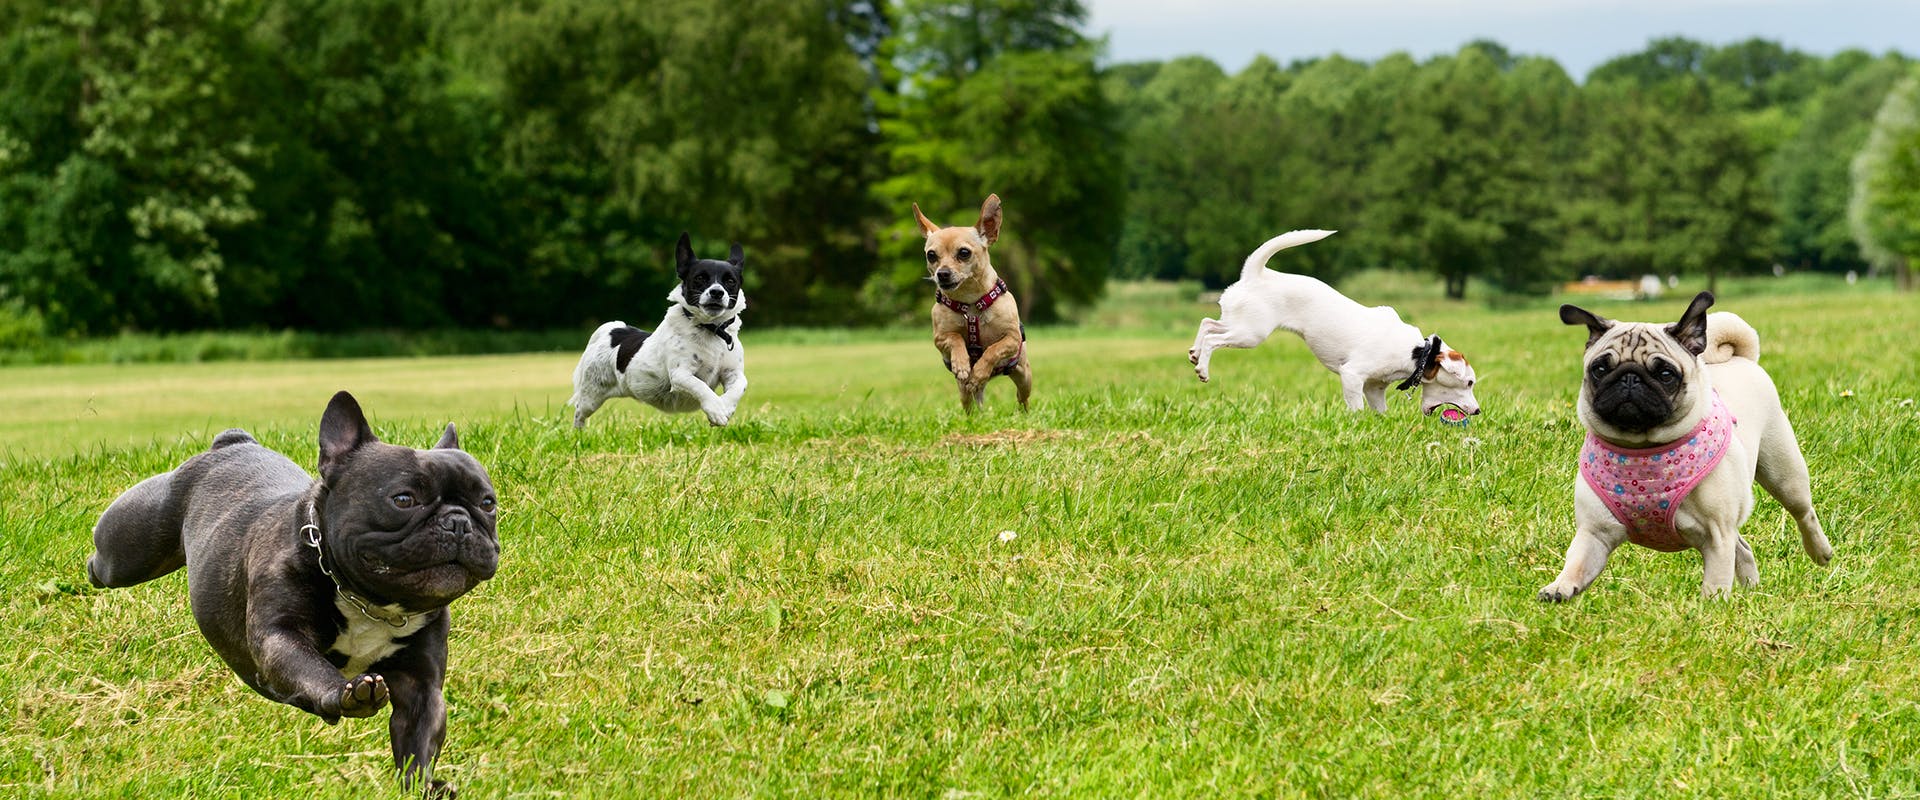 A group of dogs running and playing in a dog park